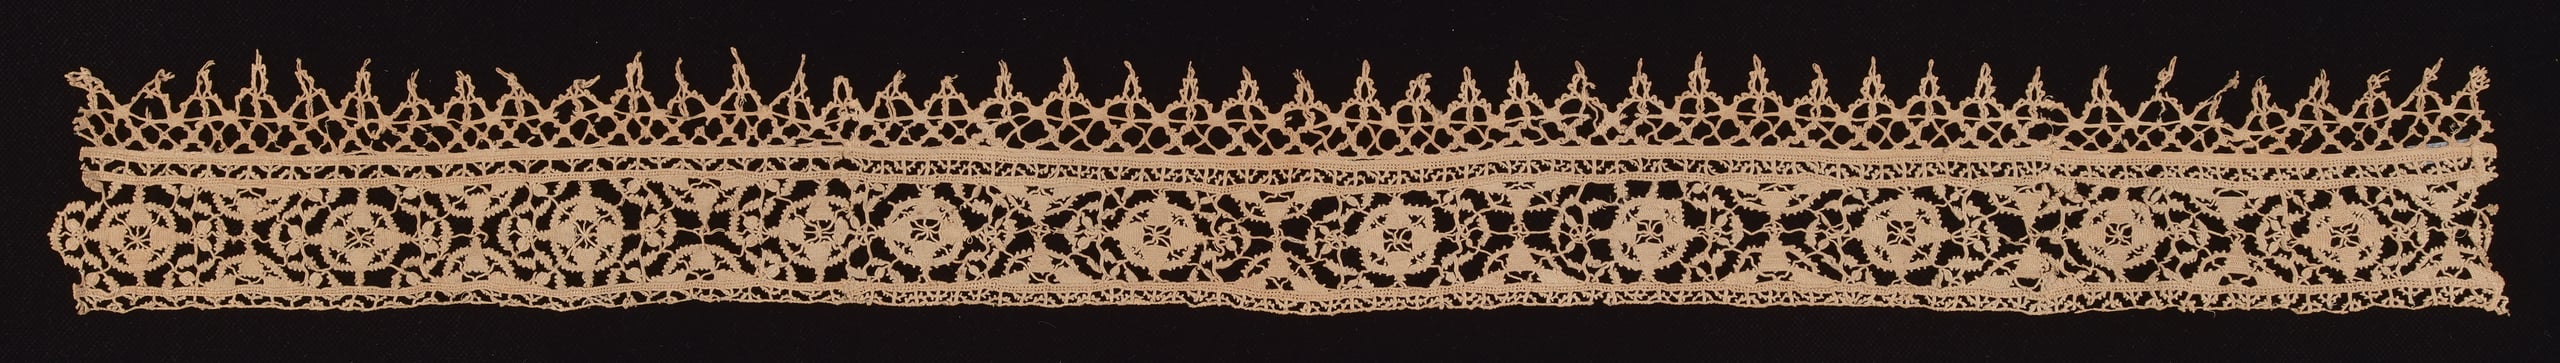 Embroidered and bobbin lace border